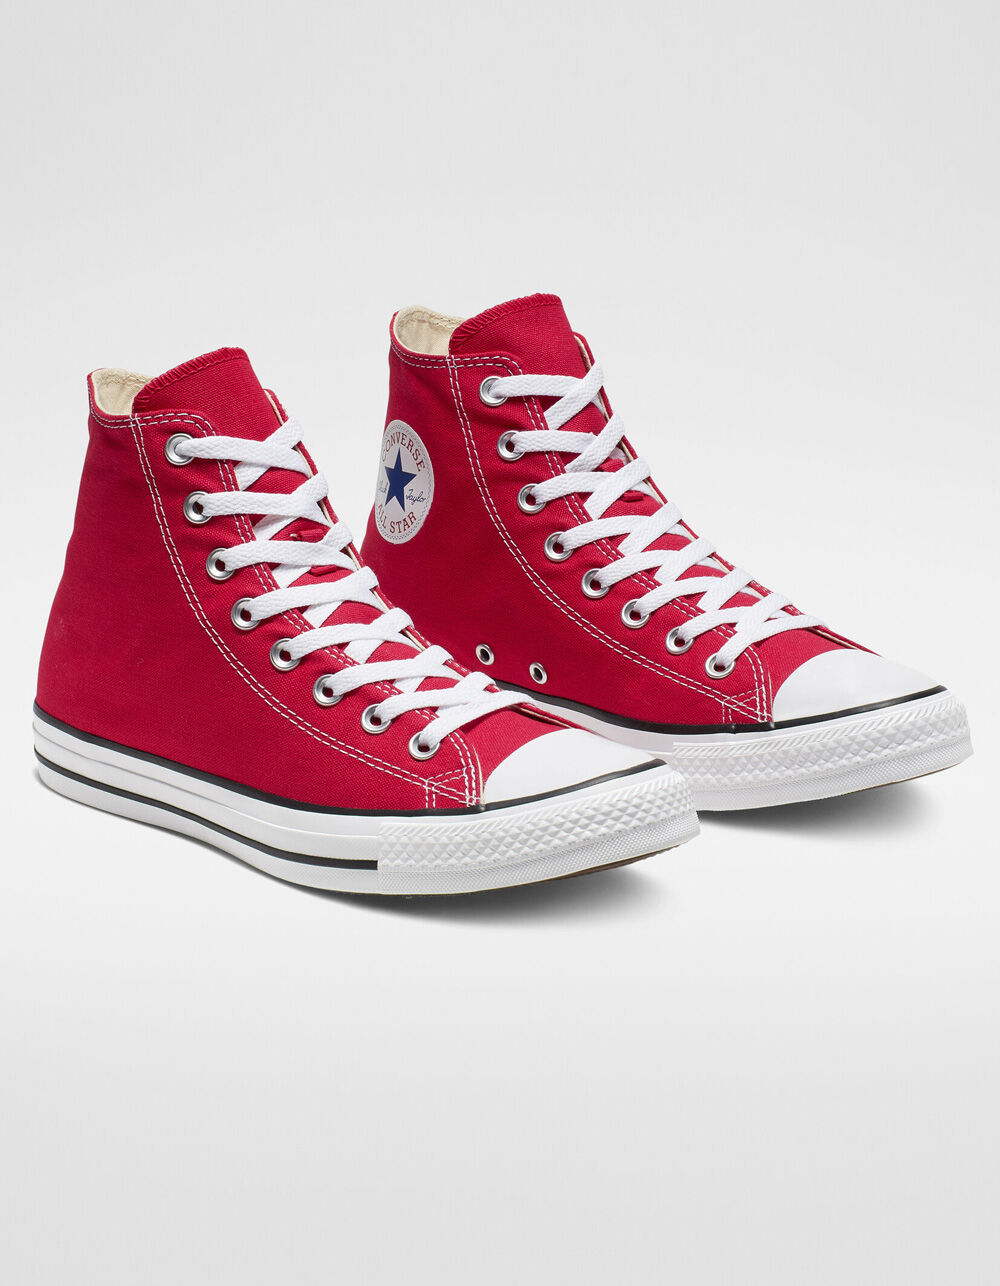 red high top converse tennis shoes